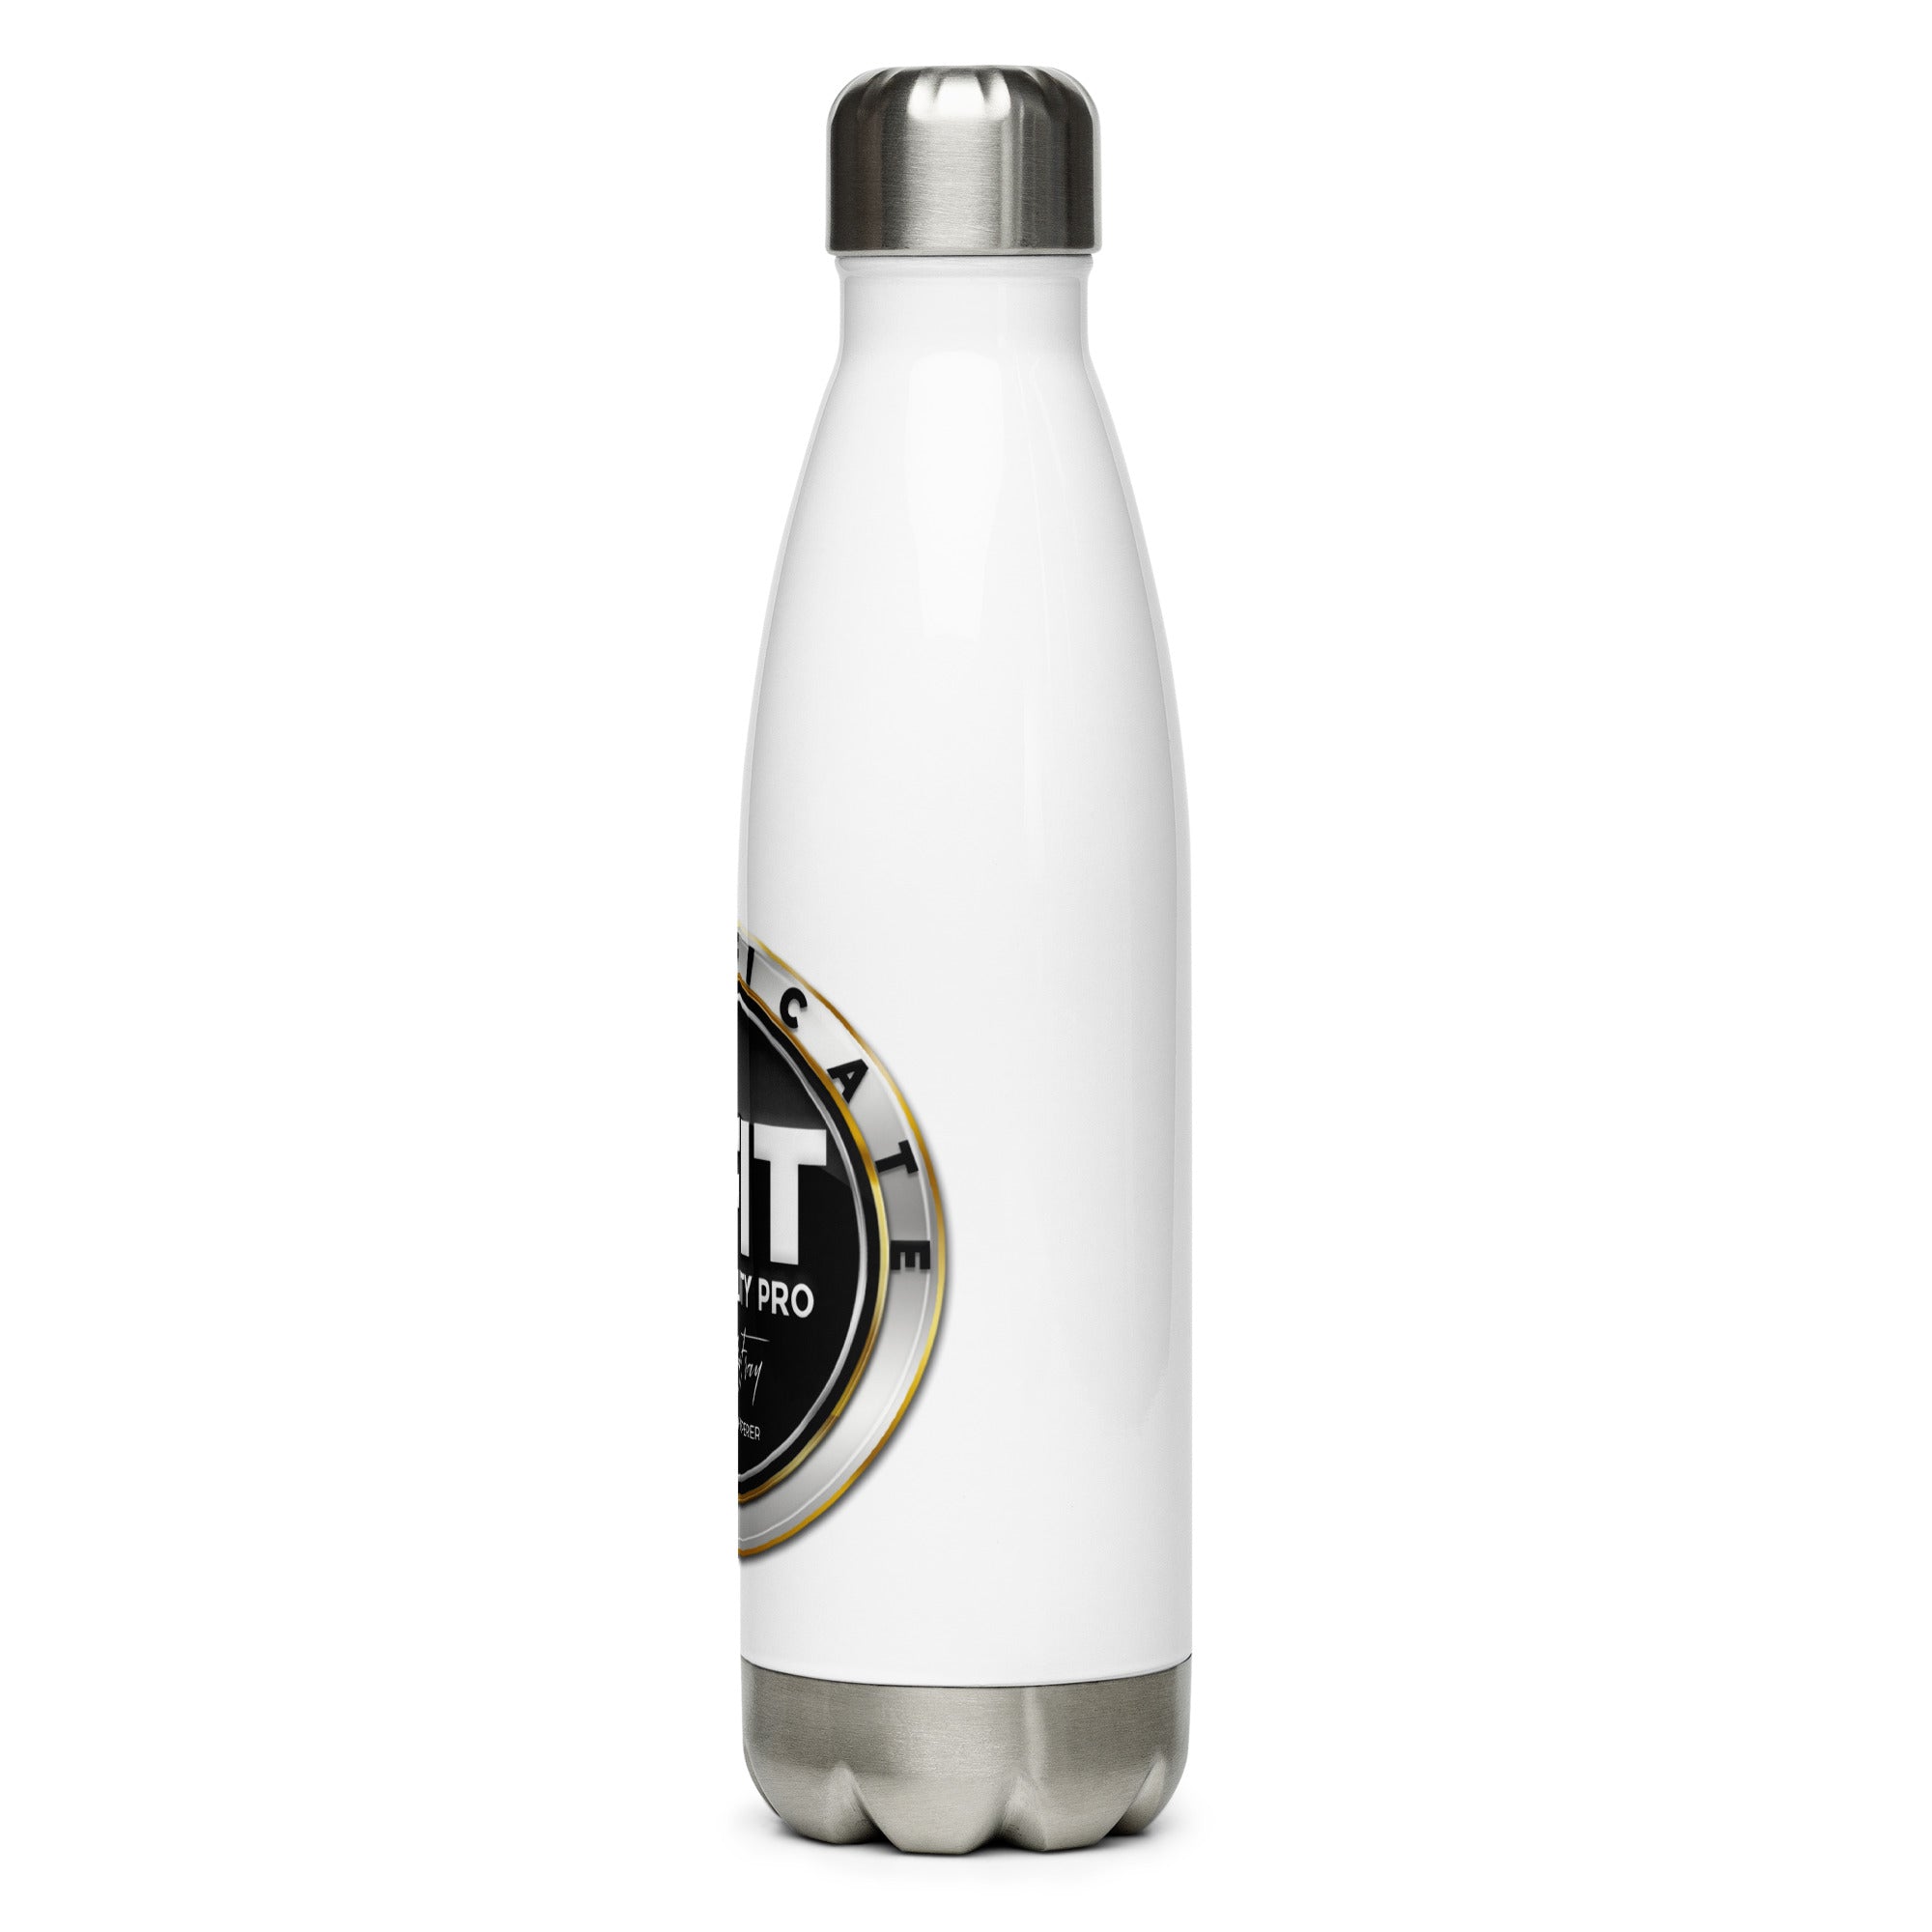 TFIT Hospitality Pro Stainless Steel Water Bottle